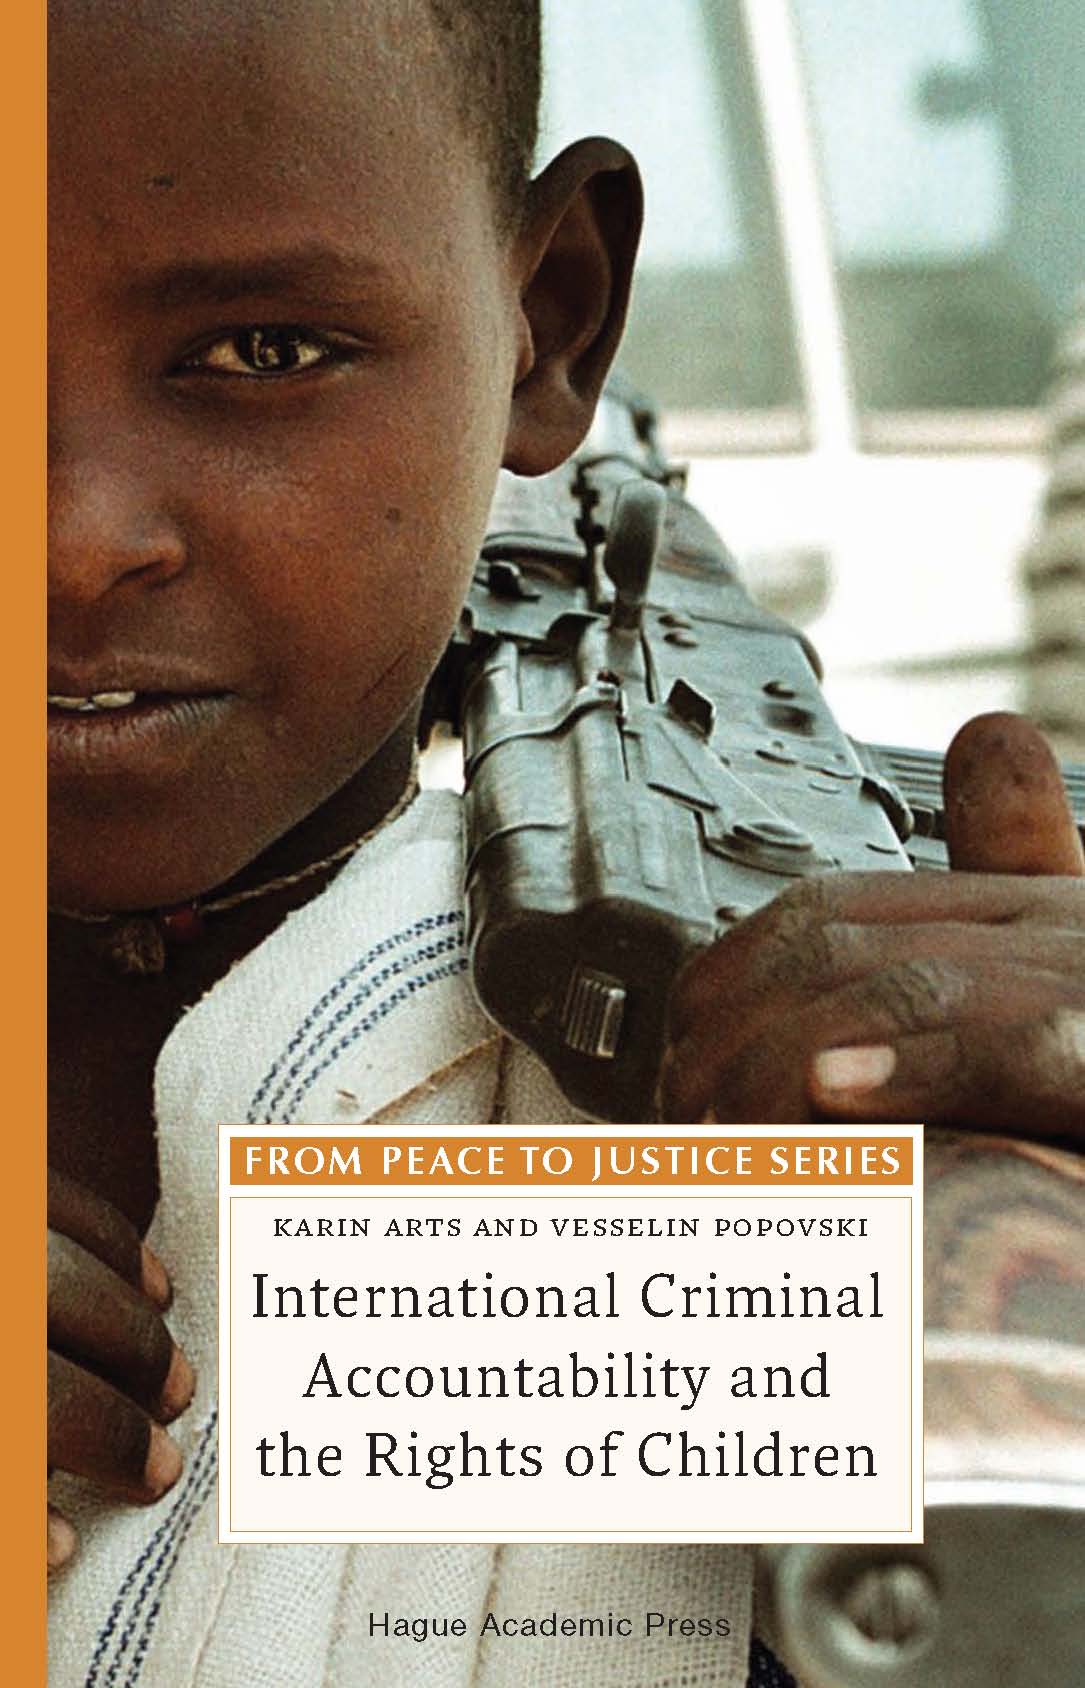 International Criminal Accountability and the Rights of Children